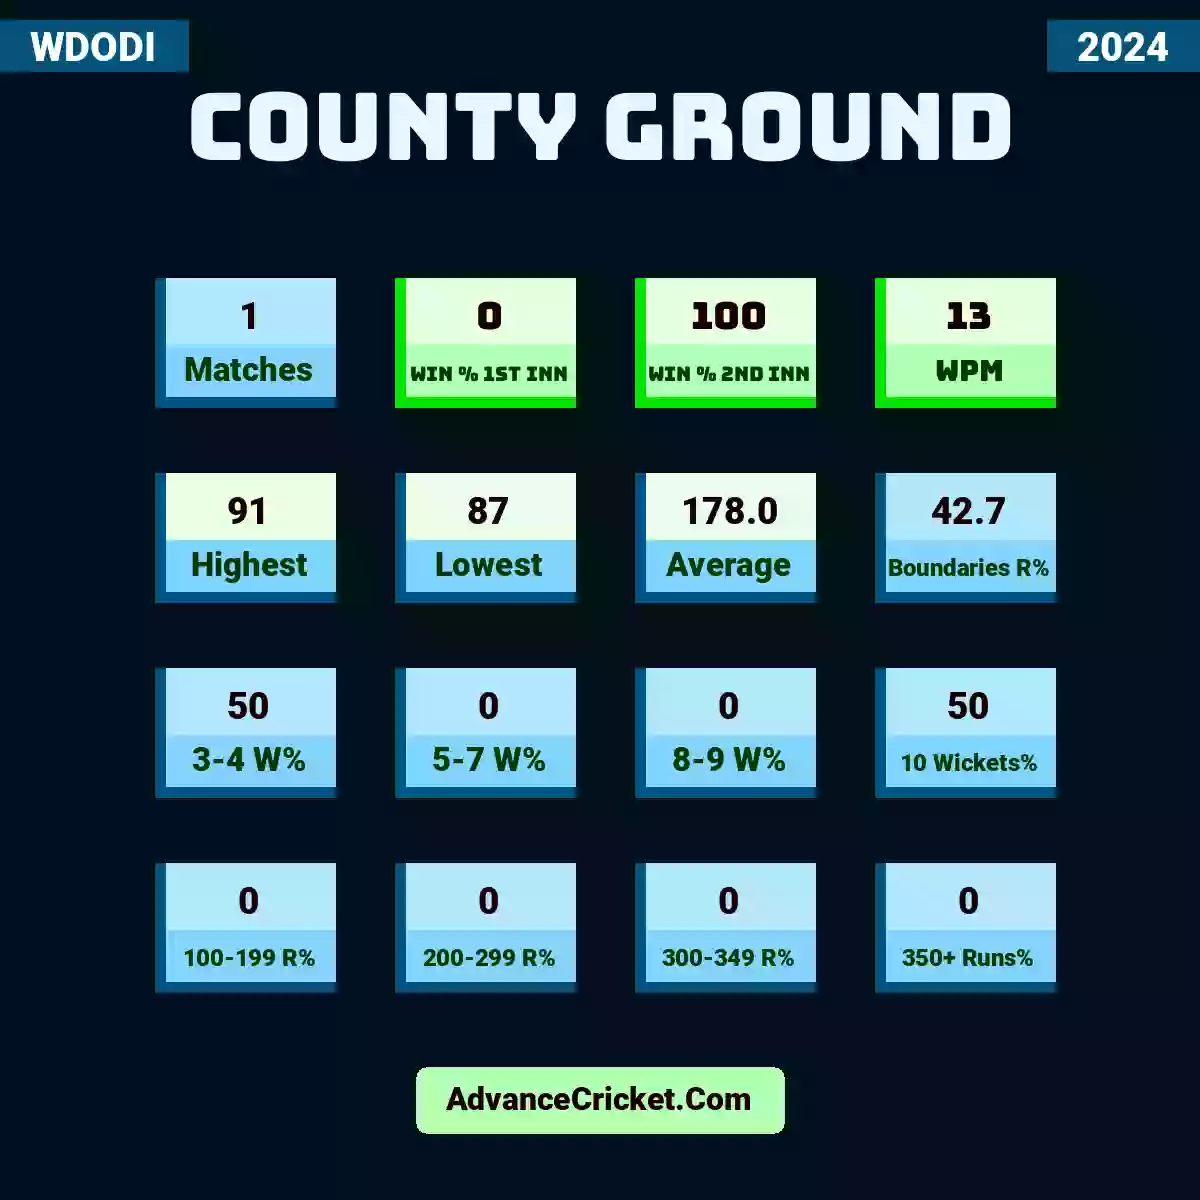 Image showing County Ground WDODI 2024 with Matches: 1, Win % 1st Inn: 0, Win % 2nd Inn: 100, WPM: 13, Highest: 91, Lowest: 87, Average: 178.0, Boundaries R%: 42.7, 3-4 W%: 50, 5-7 W%: 0, 8-9 W%: 0, 10 Wickets%: 50, 100-199 R%: 0, 200-299 R%: 0, 300-349 R%: 0, 350+ Runs%: 0.